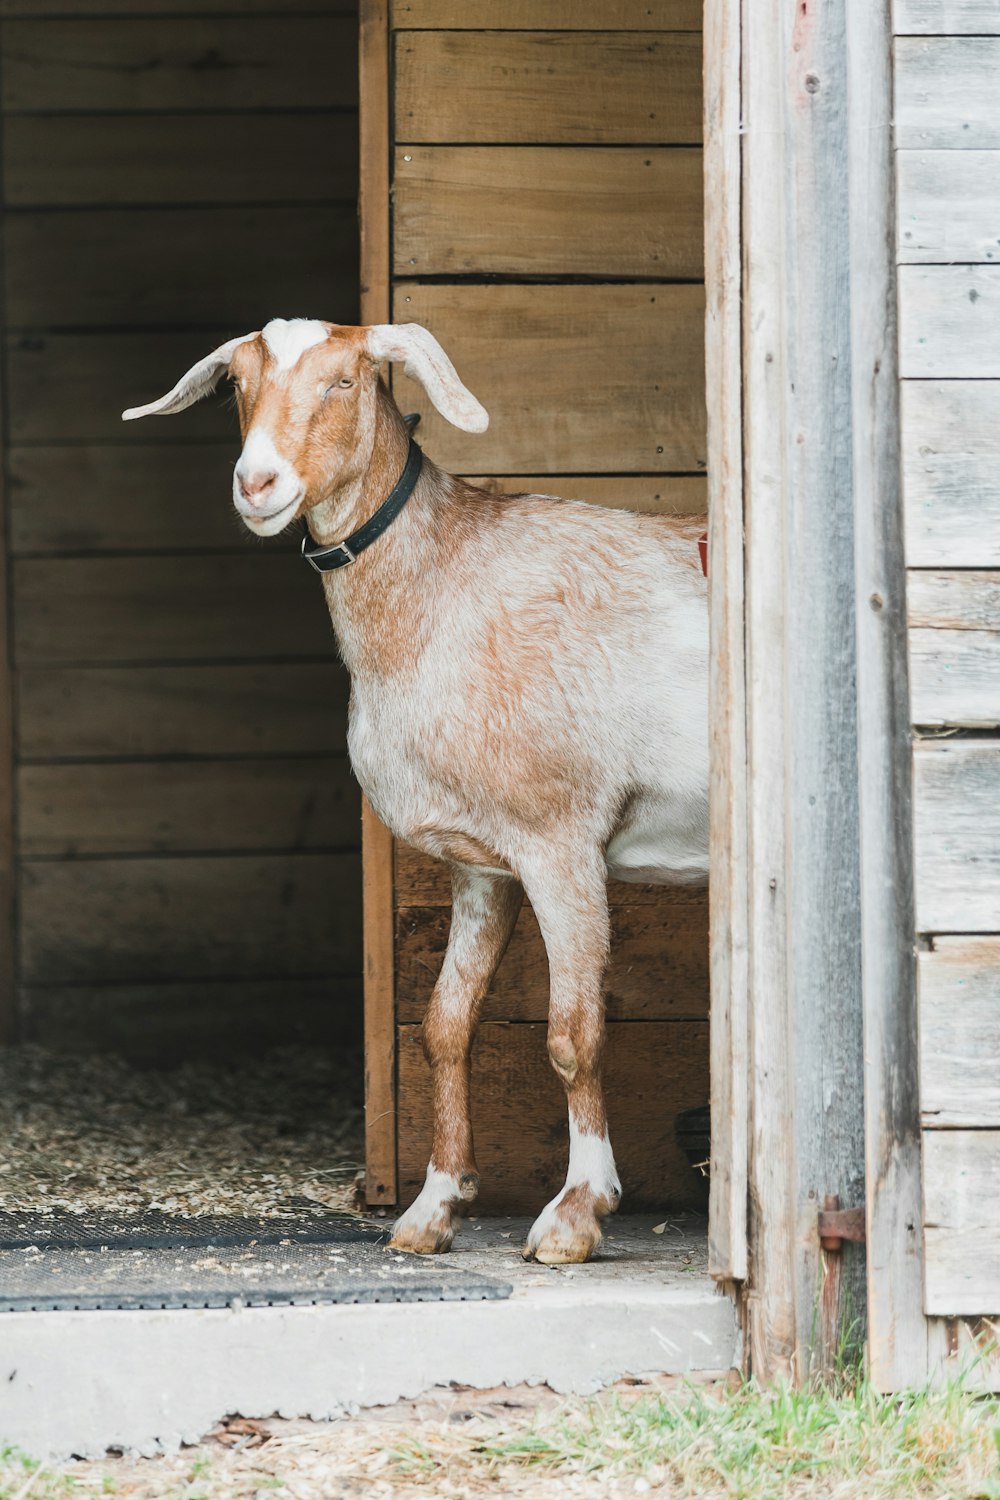 a goat standing inside of a wooden shed